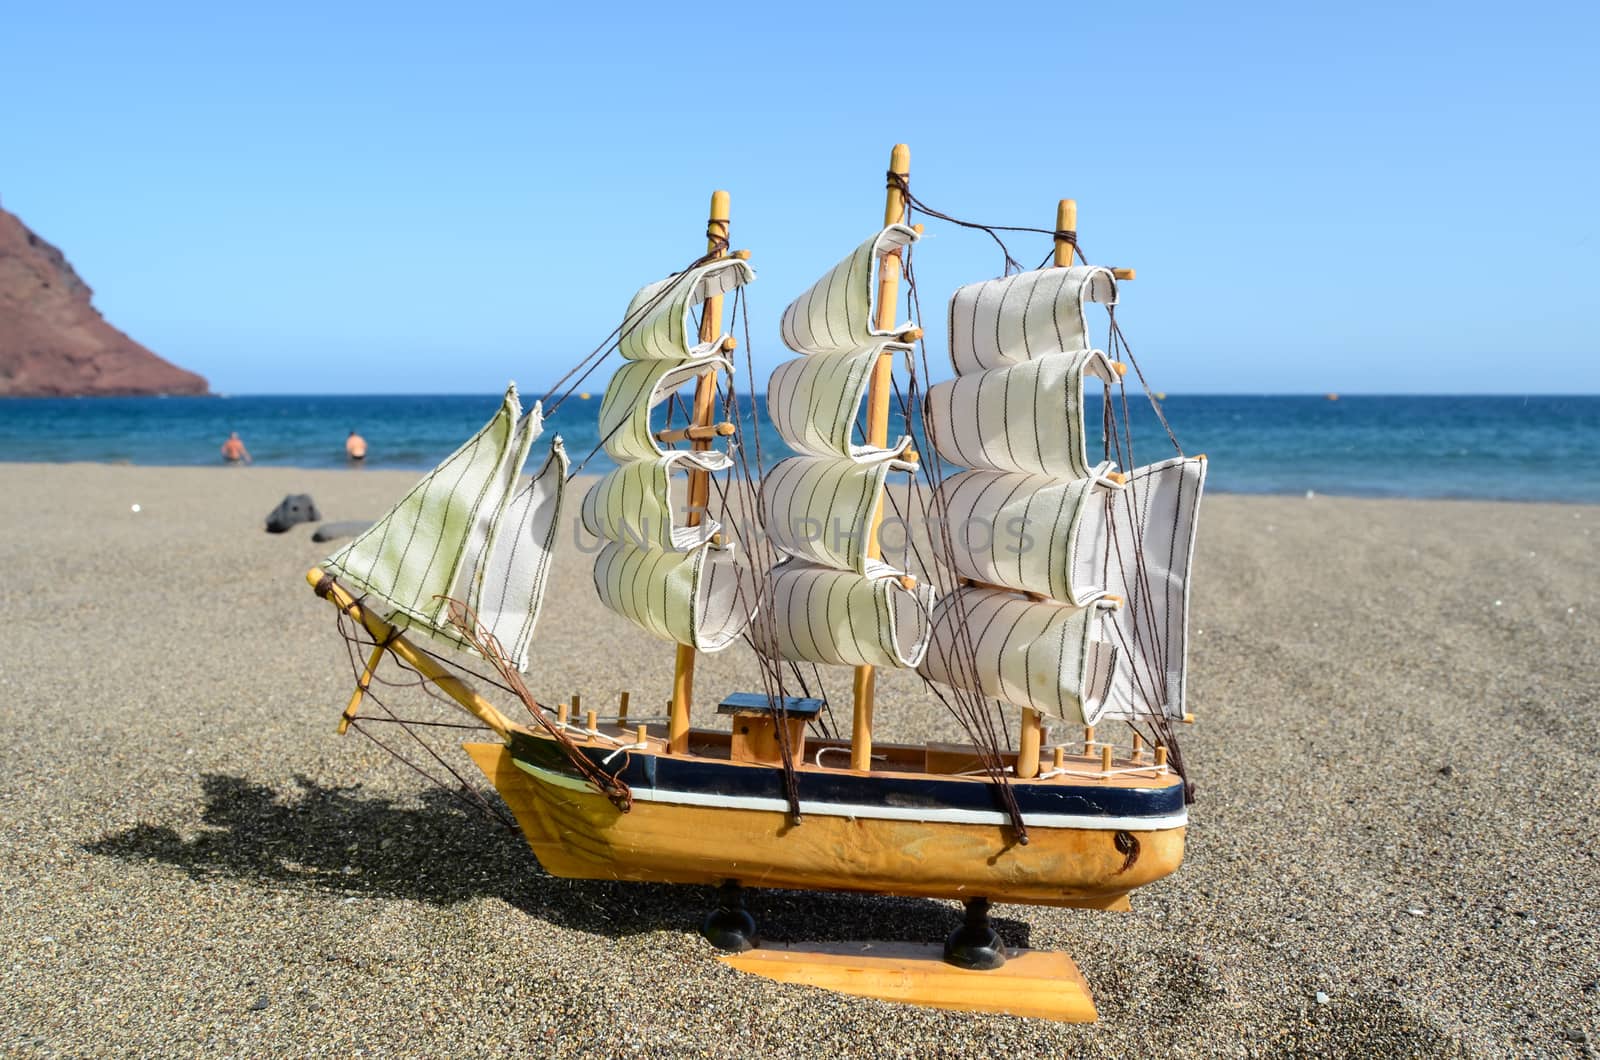 Sail Ship Toy Model in the Beach Sand Close-up